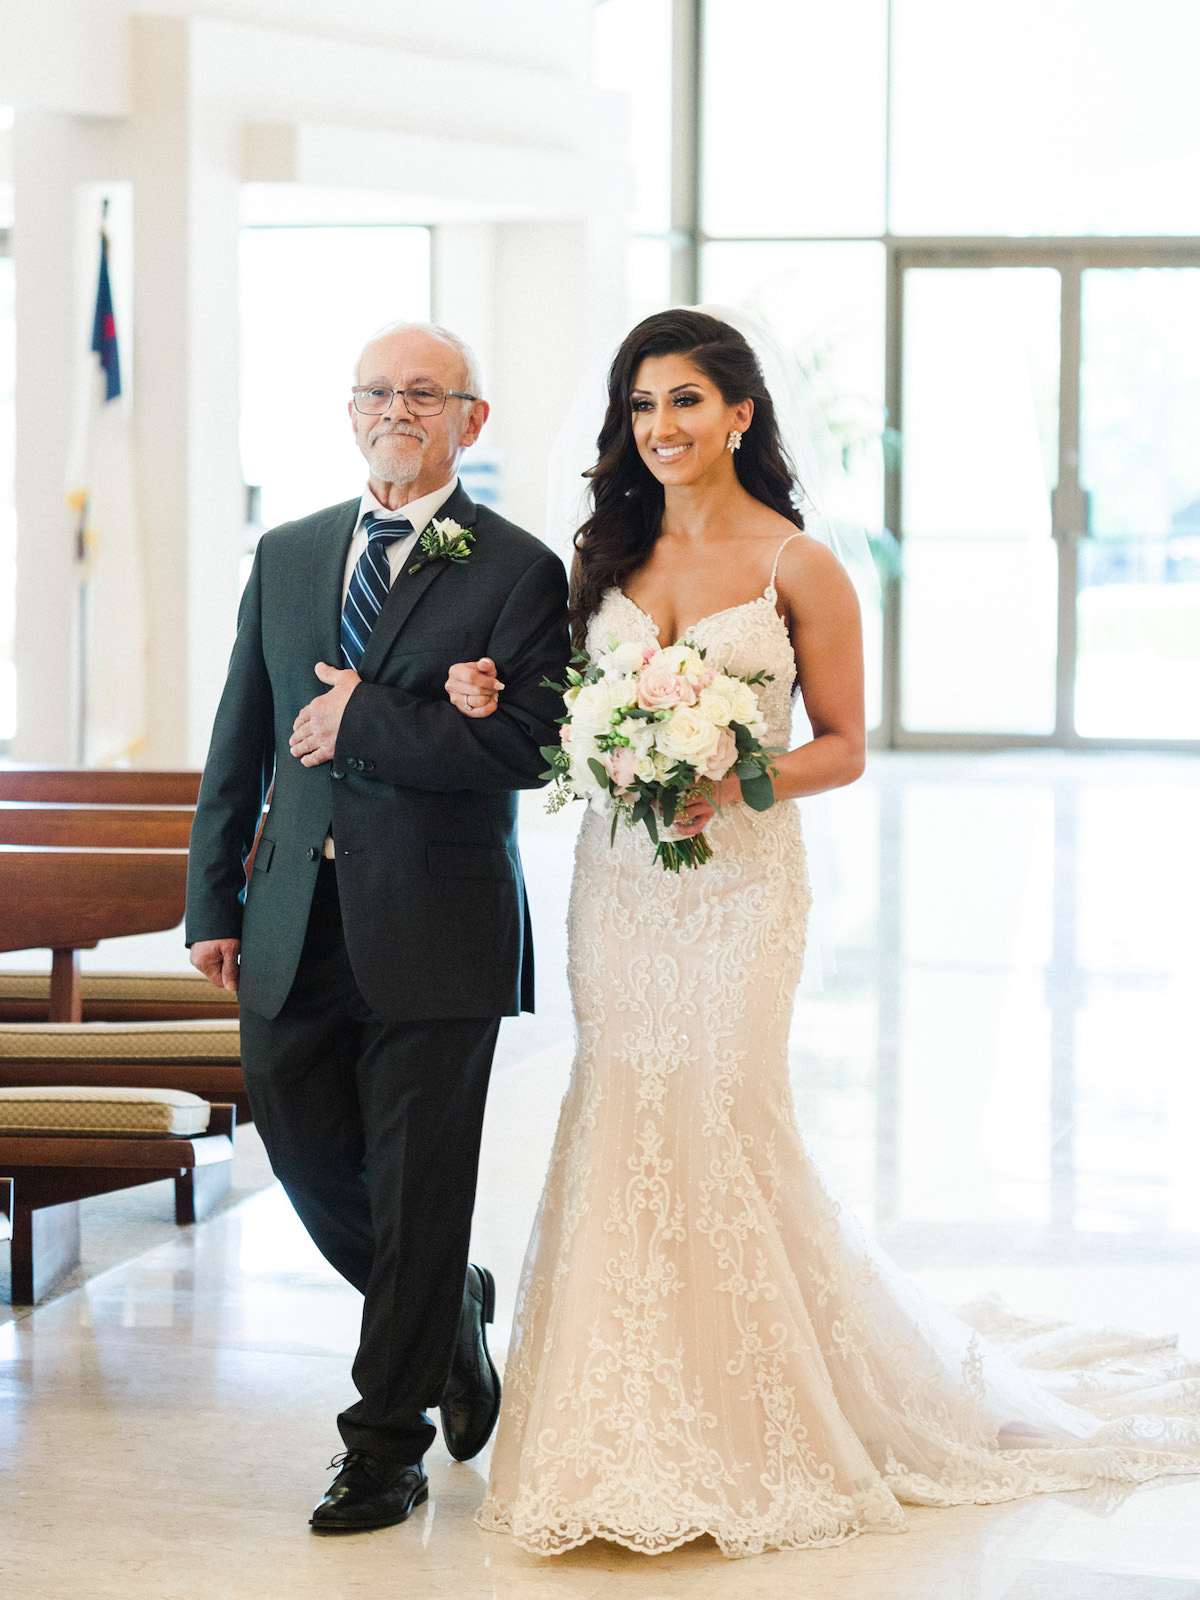 Bride and Dad Walking Down the Aisle | Champagne and Ivory Lace Sweetheart Wedding Dress Bridal Gown